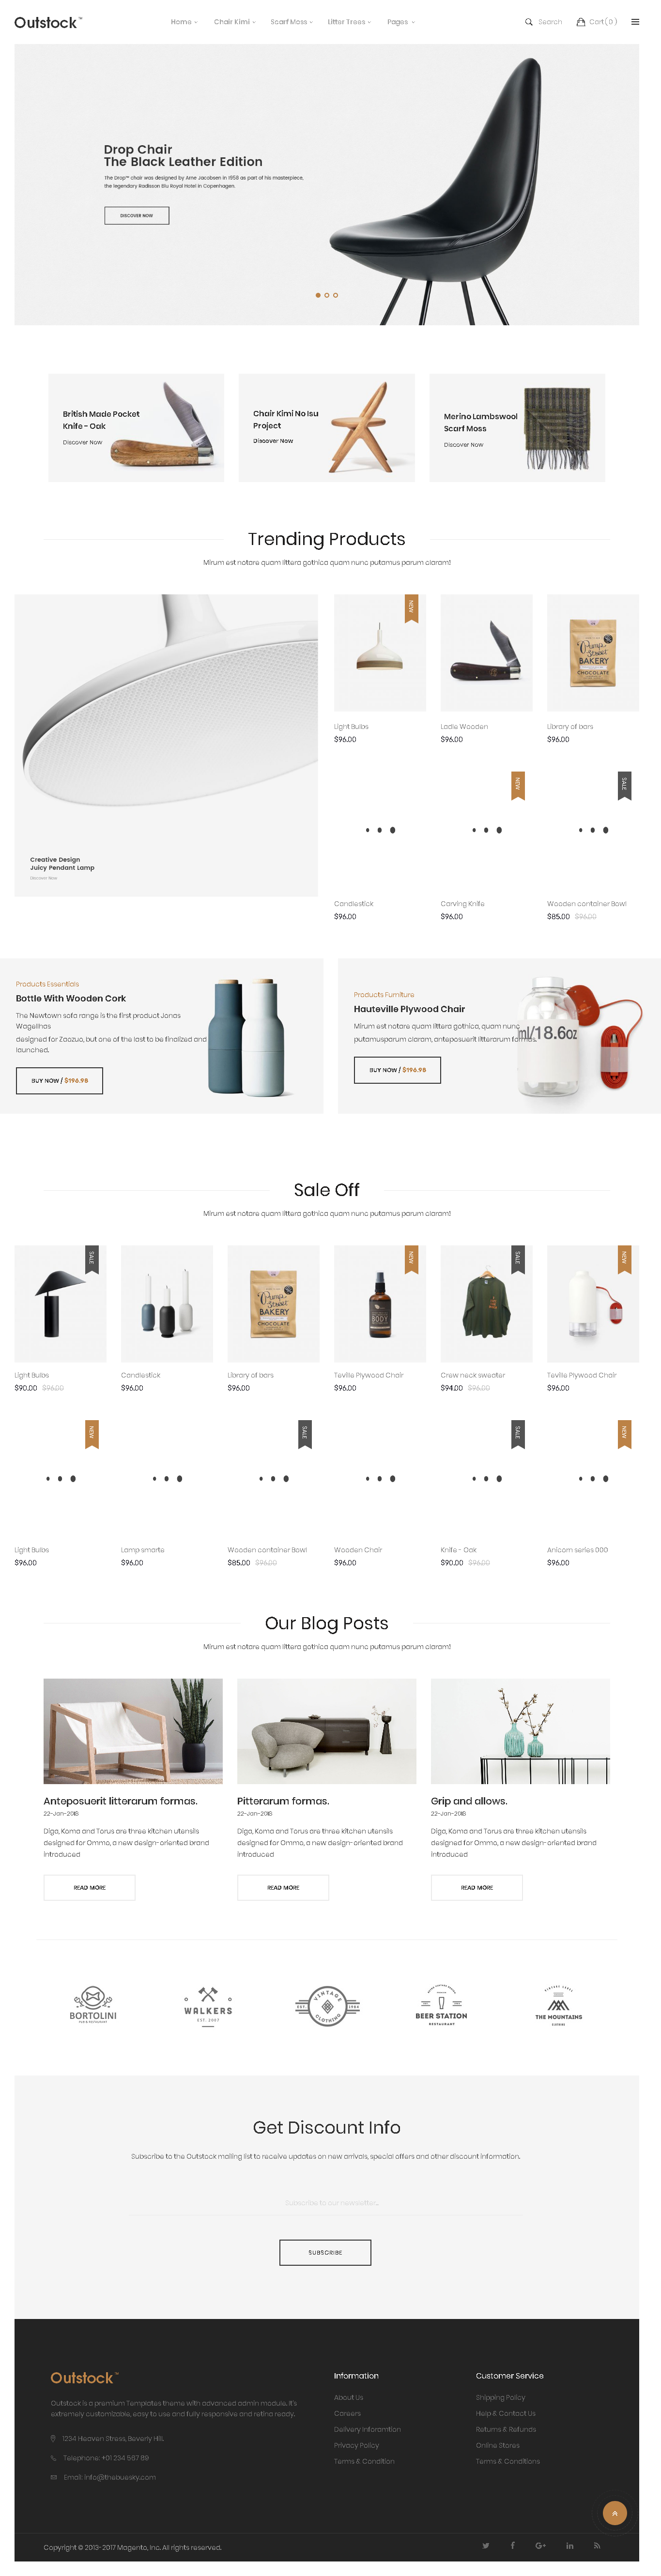 Top Magento Themes Collection for Single Product Store - Outstock - Magento 2 Responsive Furniture Theme